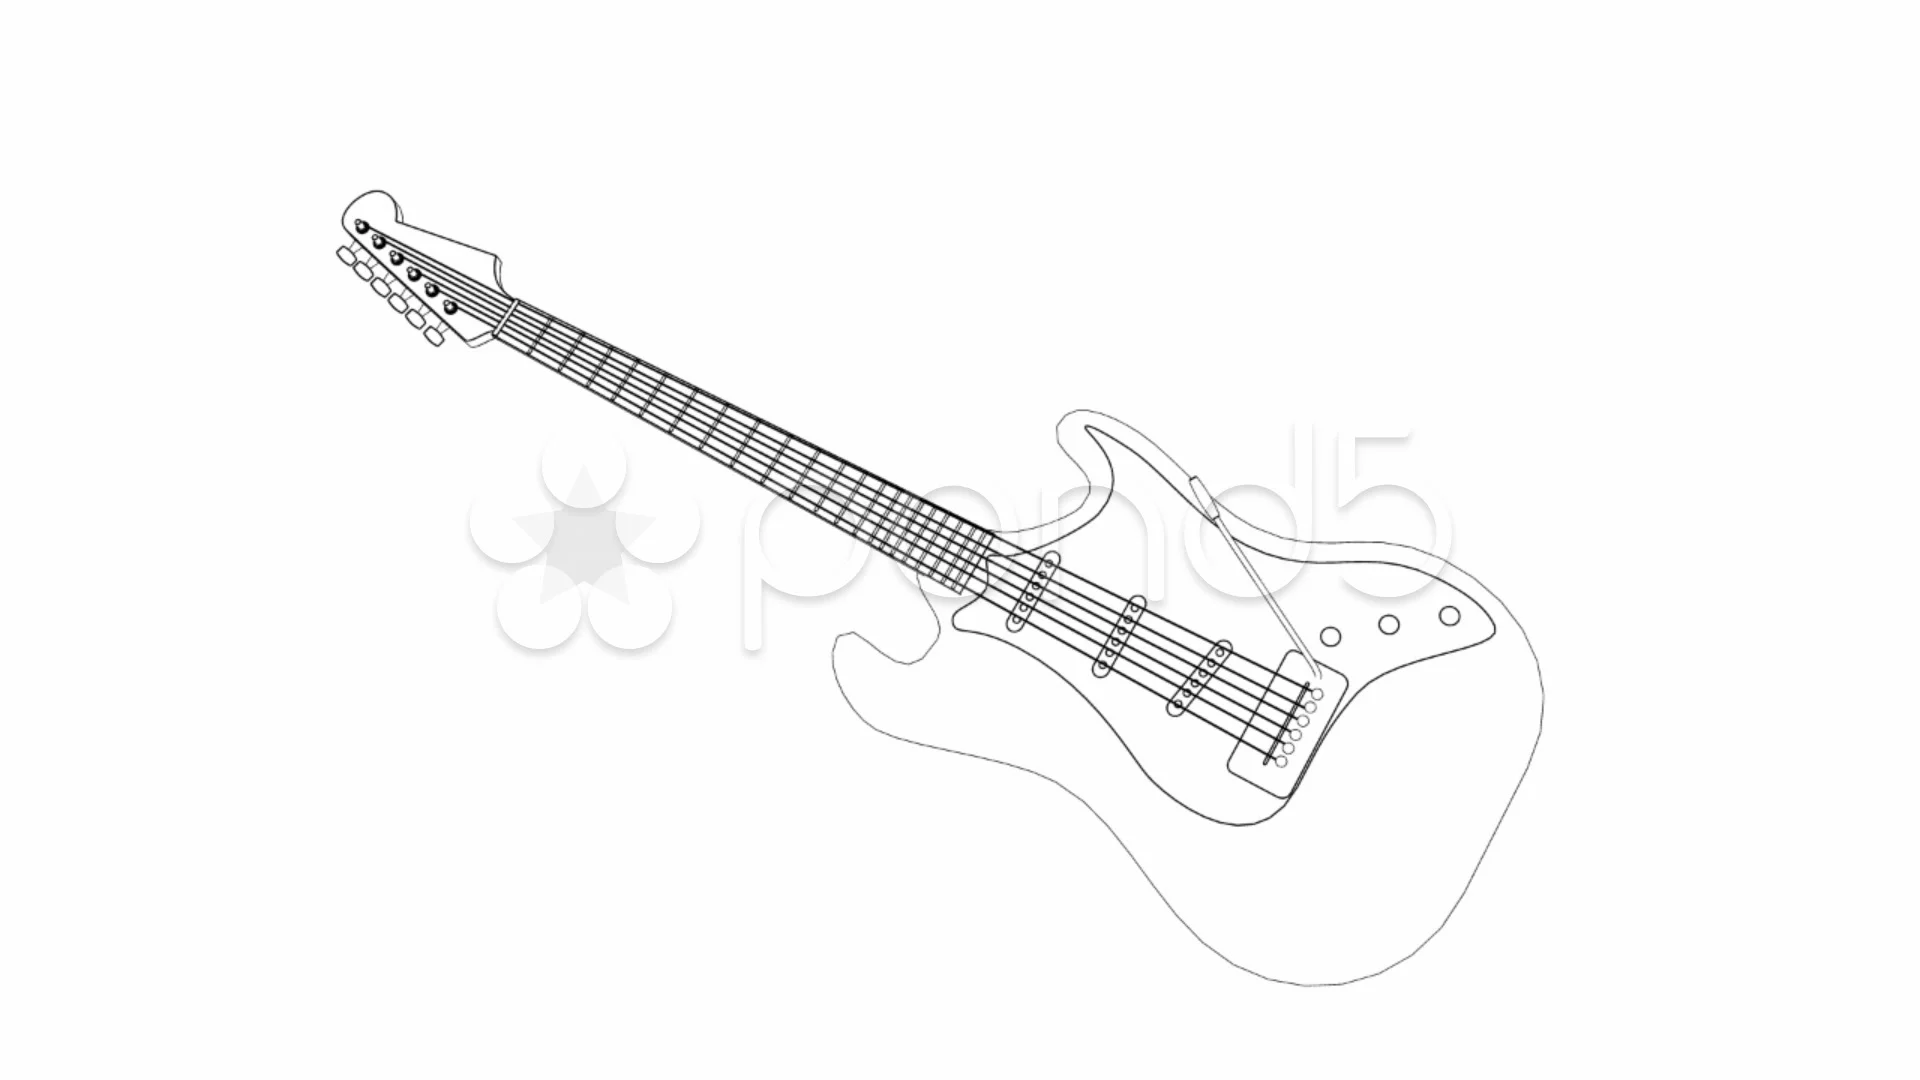 11,866 Colour Guitar Drawings Royalty-Free Photos and Stock Images |  Shutterstock